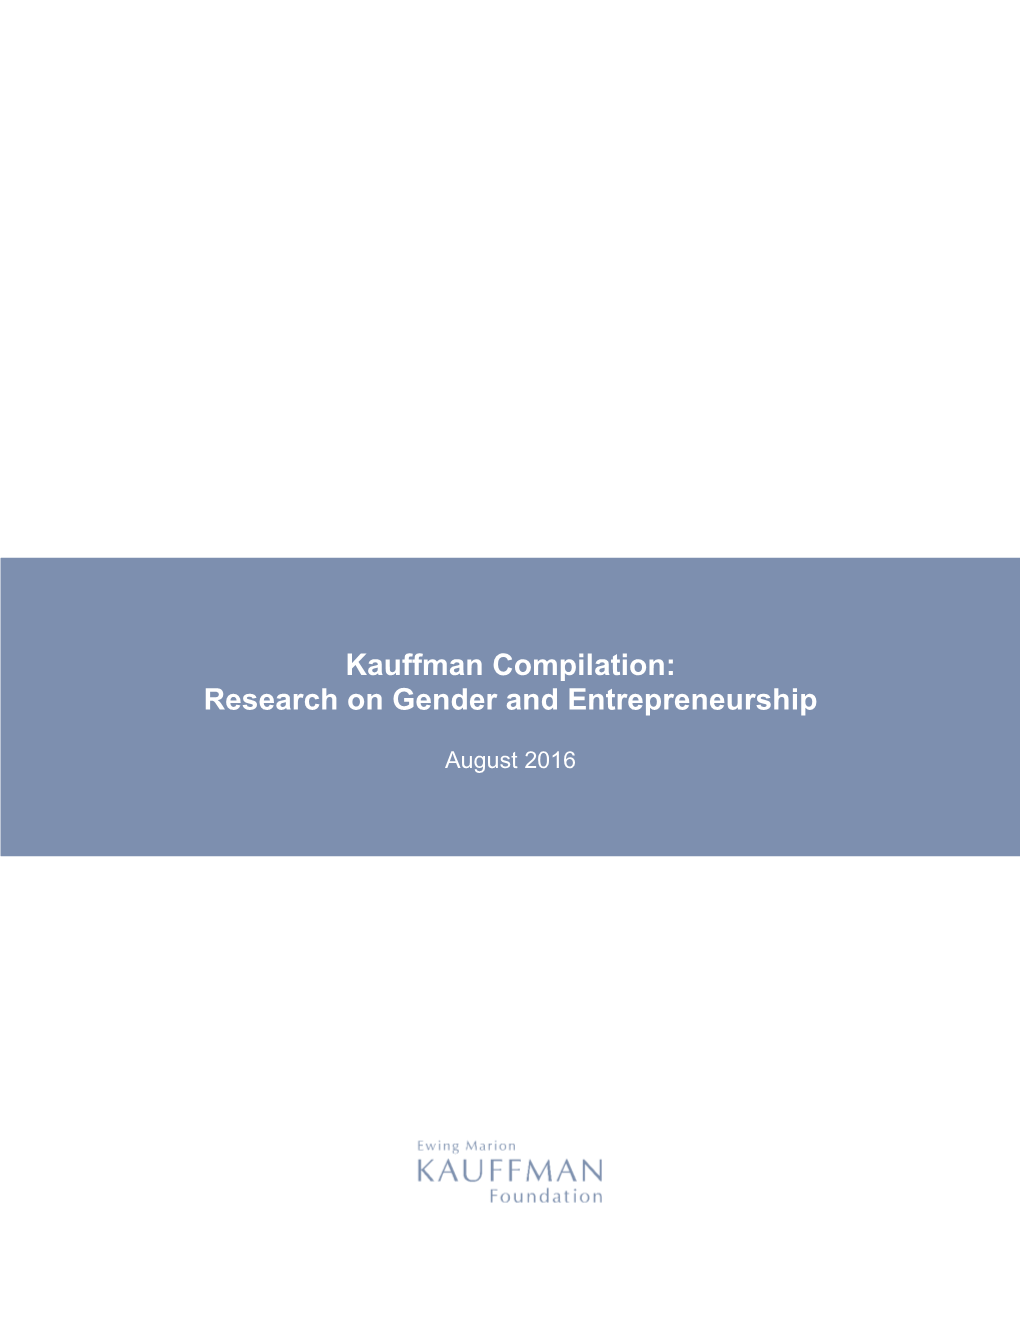 Kauffman Compilation: Research on Gender and Entrepreneurship